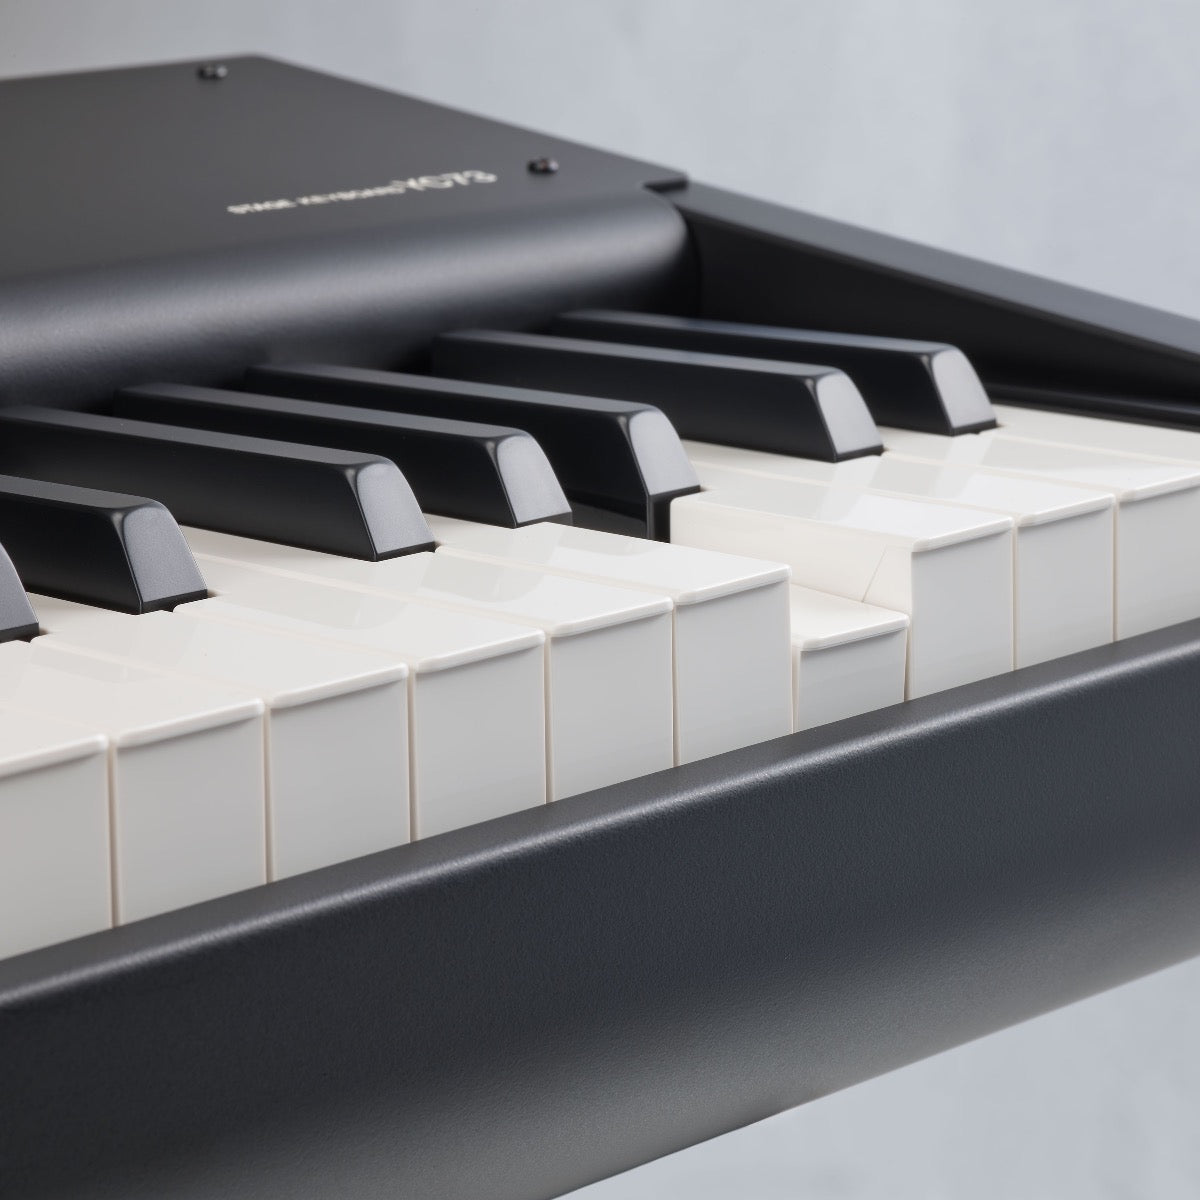 Detail view of Yamaha YC73 73-Key Stage Keyboard and Organ showing portion of keybed with one key depressed